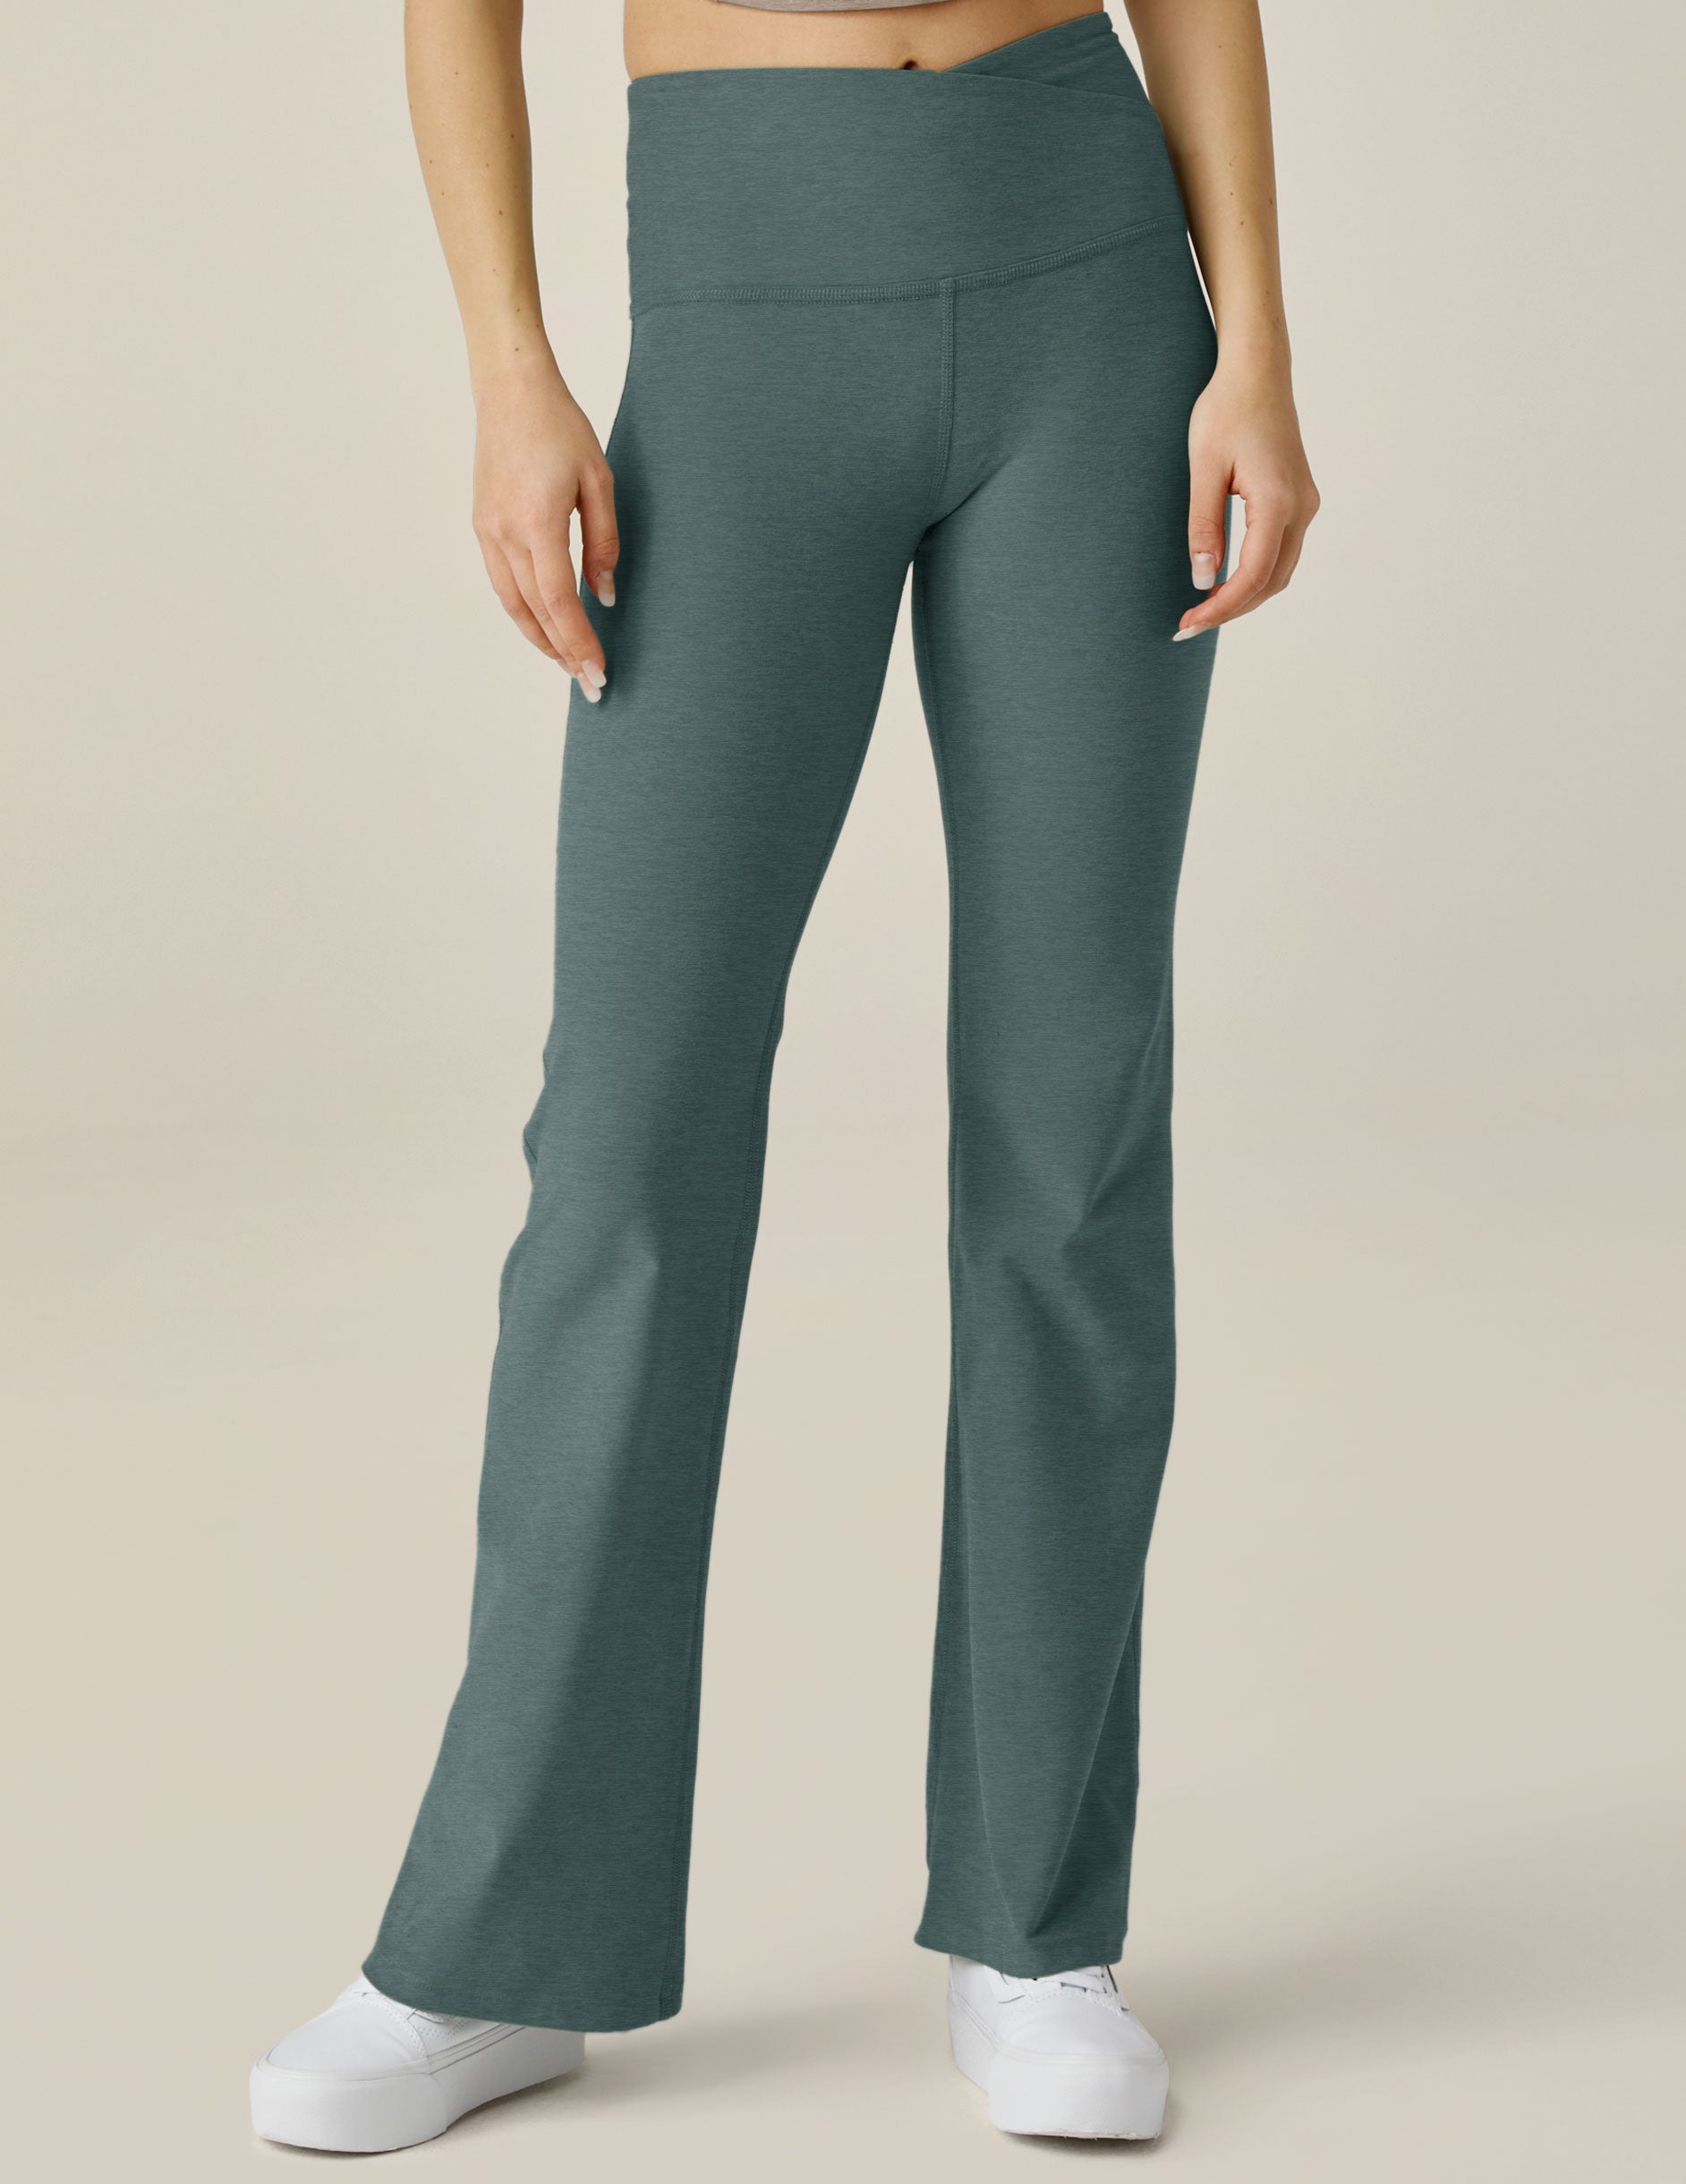 green high-waisted flare pants with a crossover detail on the front waistband. 